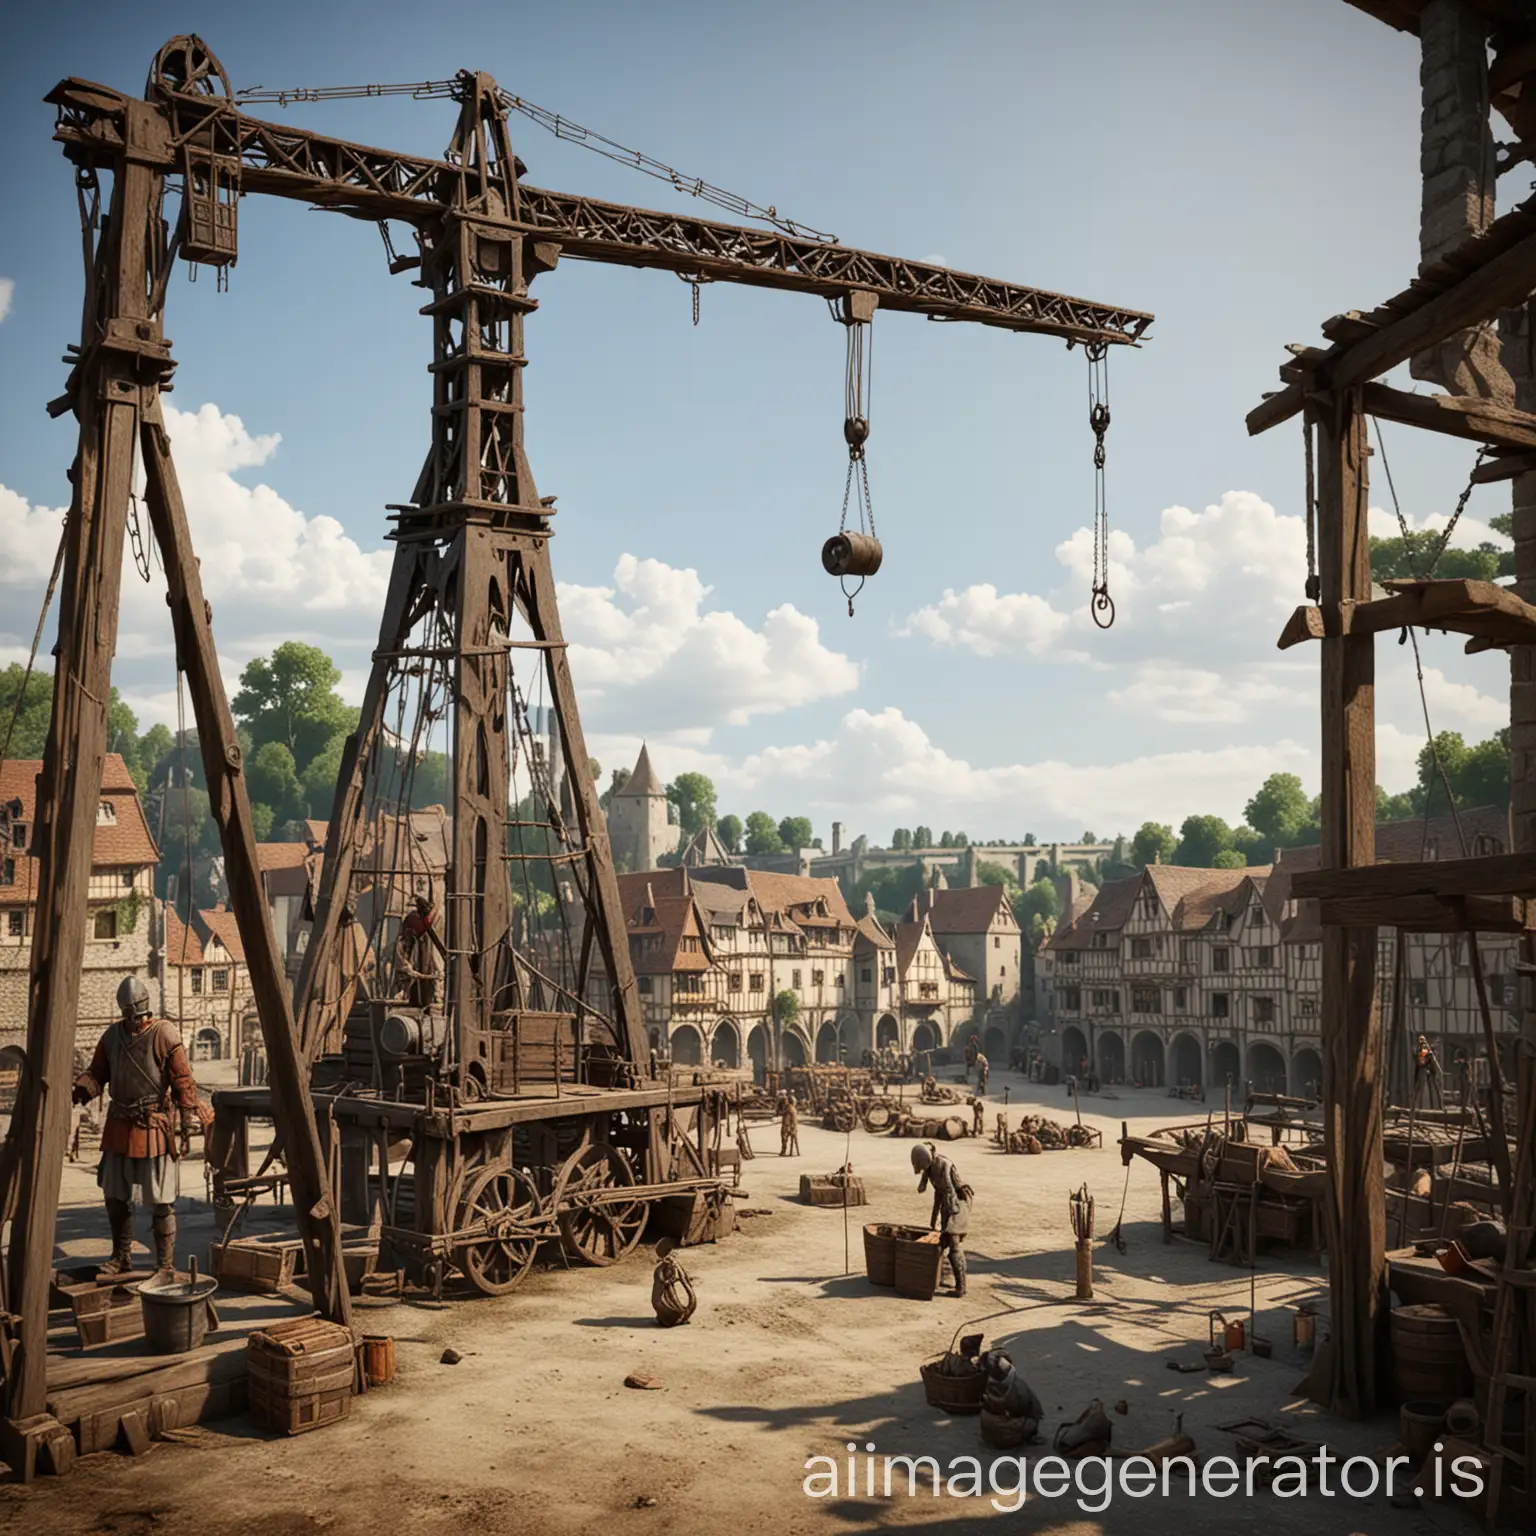 Create a realistic and detailed image centered on a medieval crane with a pulley system from the 11th to 12th century. The subject should be isolated but can have a fully detailed background, ensuring the focus remains on the crane. The crane should be authentic and precise to the medieval era, featuring wooden and metal components typical of that time. Place this crane outdoors in the middle of an authentic medieval construction site, with a realistic and detailed background including workers and tools appropriate to the period. The setting should depict a bustling medieval construction scene in a natural outdoor environment. The lighting should be clear and well-lit, highlighting the intricate details of the crane and pulley system. Ensure each generation of this image shows a different camera angle or viewpoint, capturing various perspectives of the crane and the realistic medieval construction site around it.